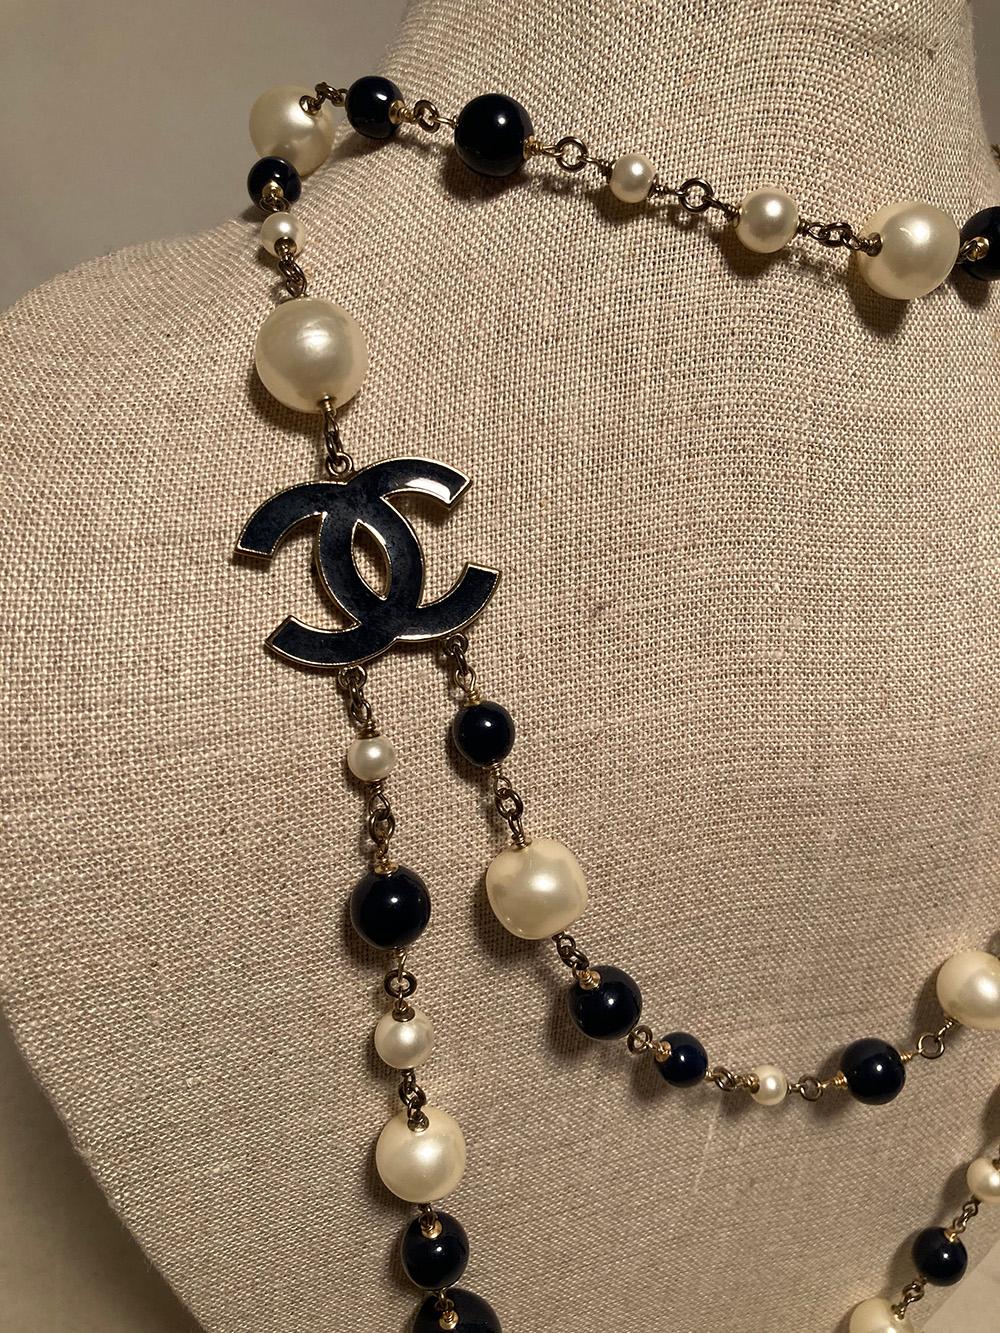 Chanel Black and Pearl Beaded Necklace in excellent condition. Various sized black and pearl beads strung throughout. Black enamel CC logo emblem. Beads measure .25-.75